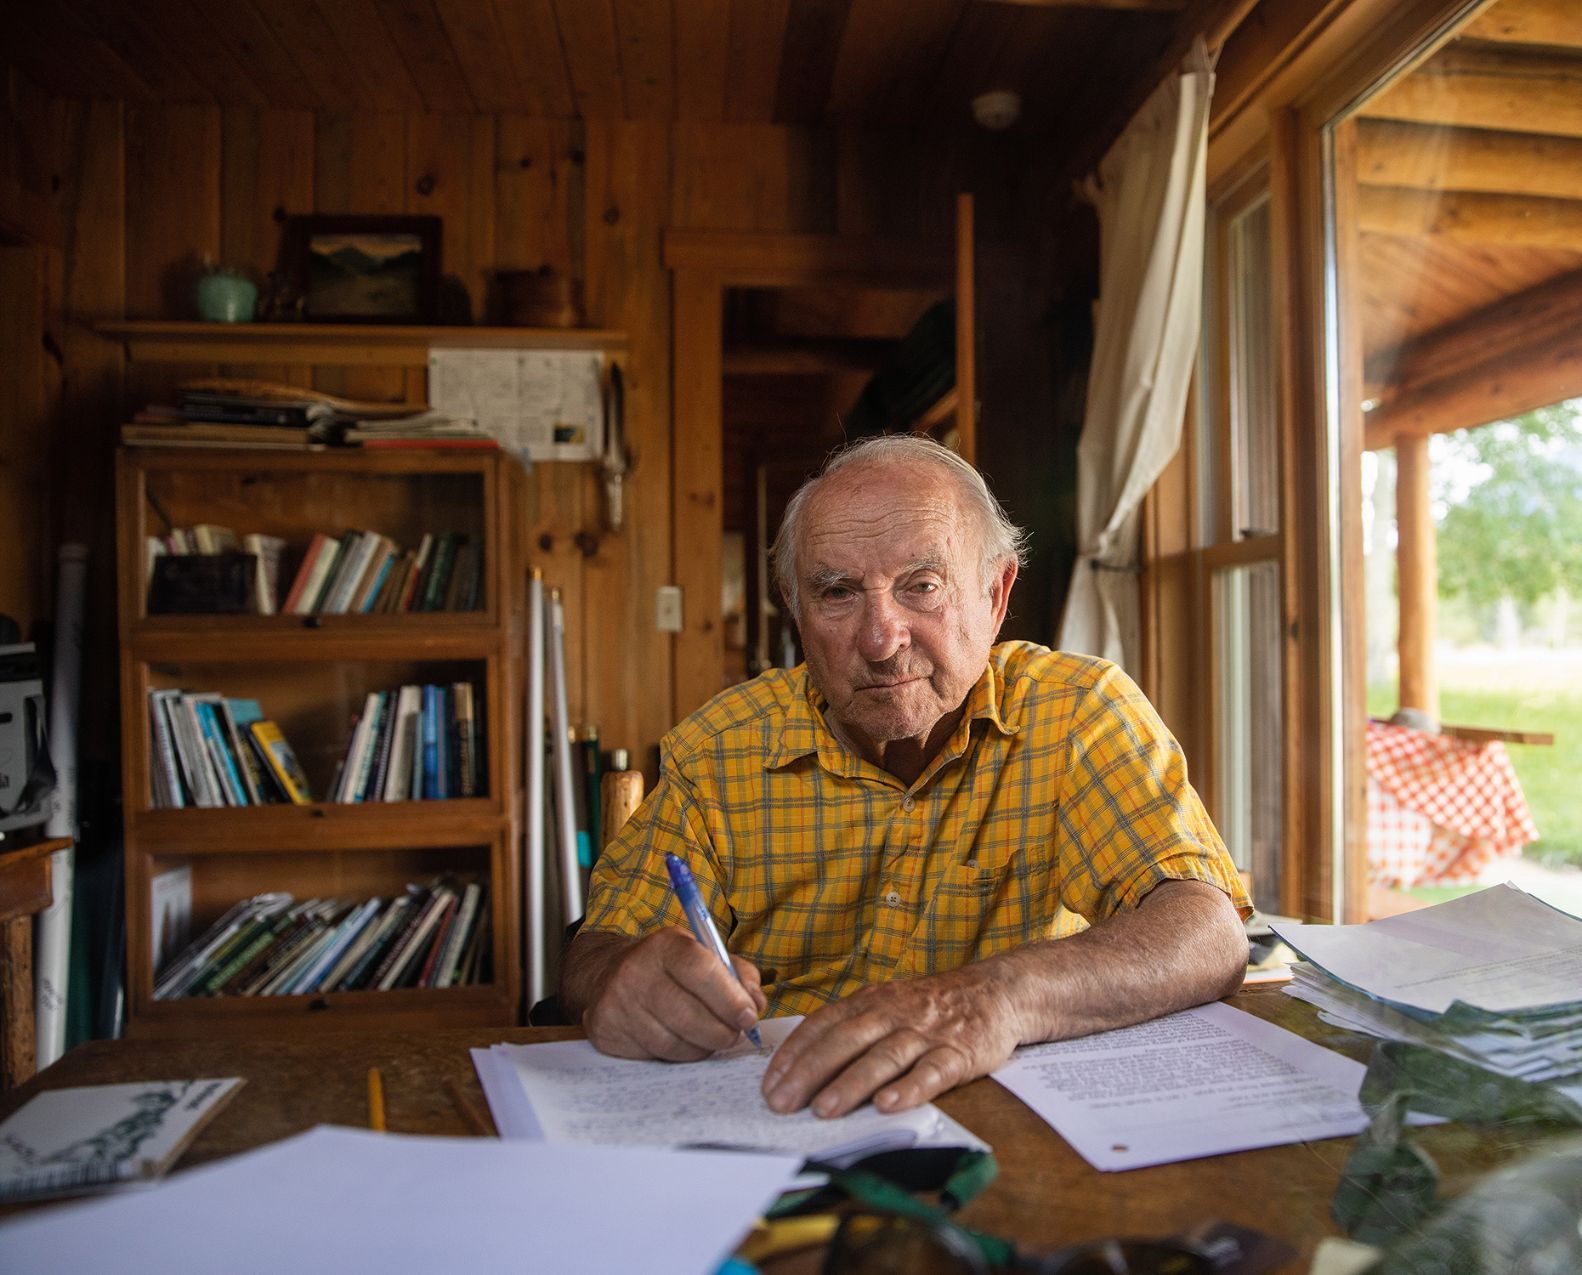 Yvon Chouinard, who has given away the company Patagonia to help fight the climate crisis. Photo: Campbell Brewer